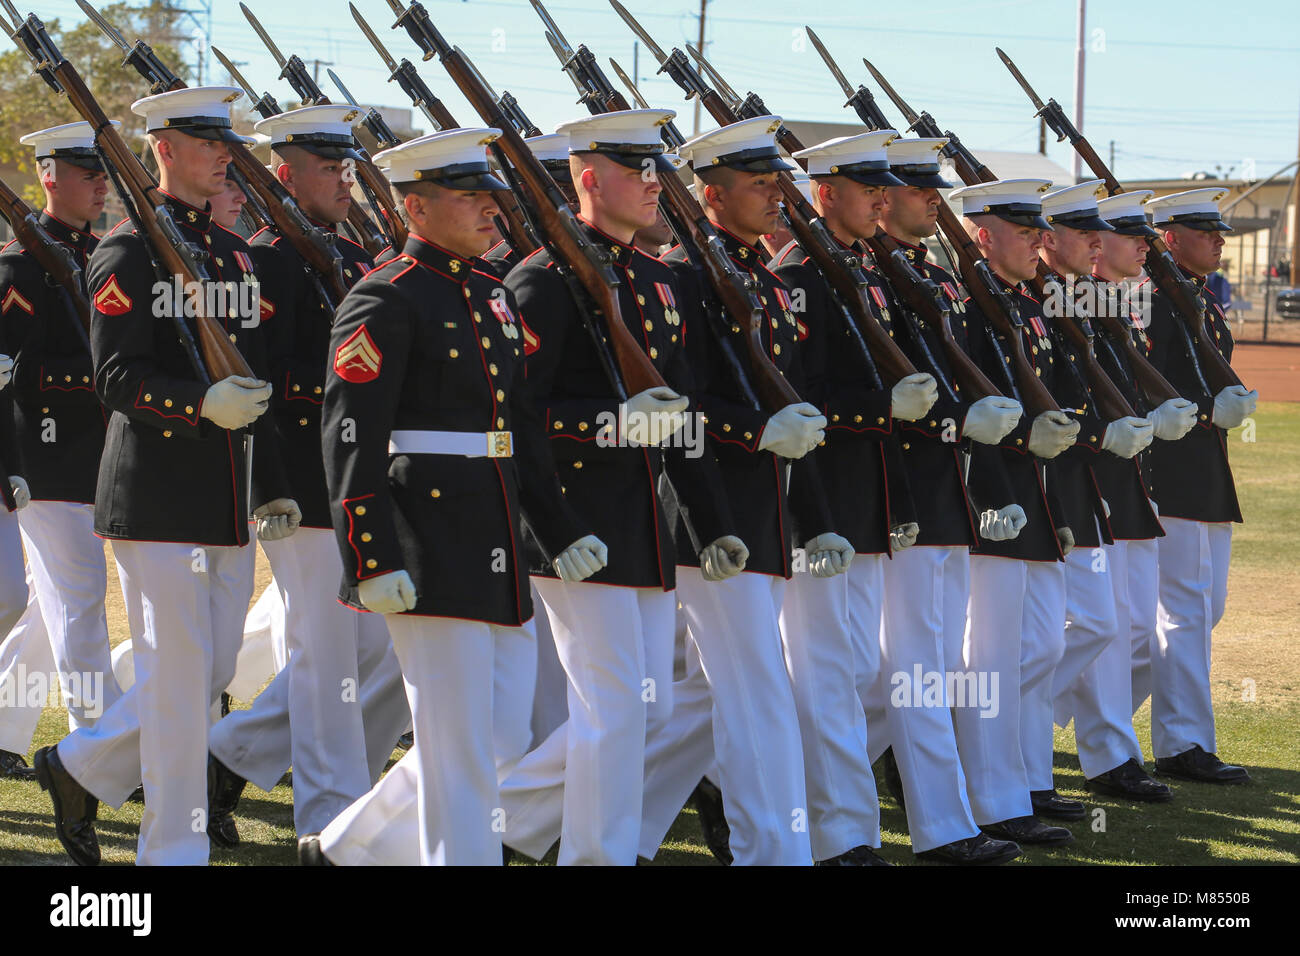 The U.S. Marine Corps Silent Drill Platoon marches during the “pass in review” for a dress rehearsal of the Battle Color ceremony at Marine Corps Air Station Yuma, Yuma, Az., March 2, 2018. This dress rehearsal marks the end of the Marines’ month-long training phase in Yuma. The Marines will move on to display their hard work and dedication during their performances on the West Coast Tour and throughout the 2018 parade season.(Official Marine Corps photo by Cpl. Damon Mclean/Released) Stock Photo